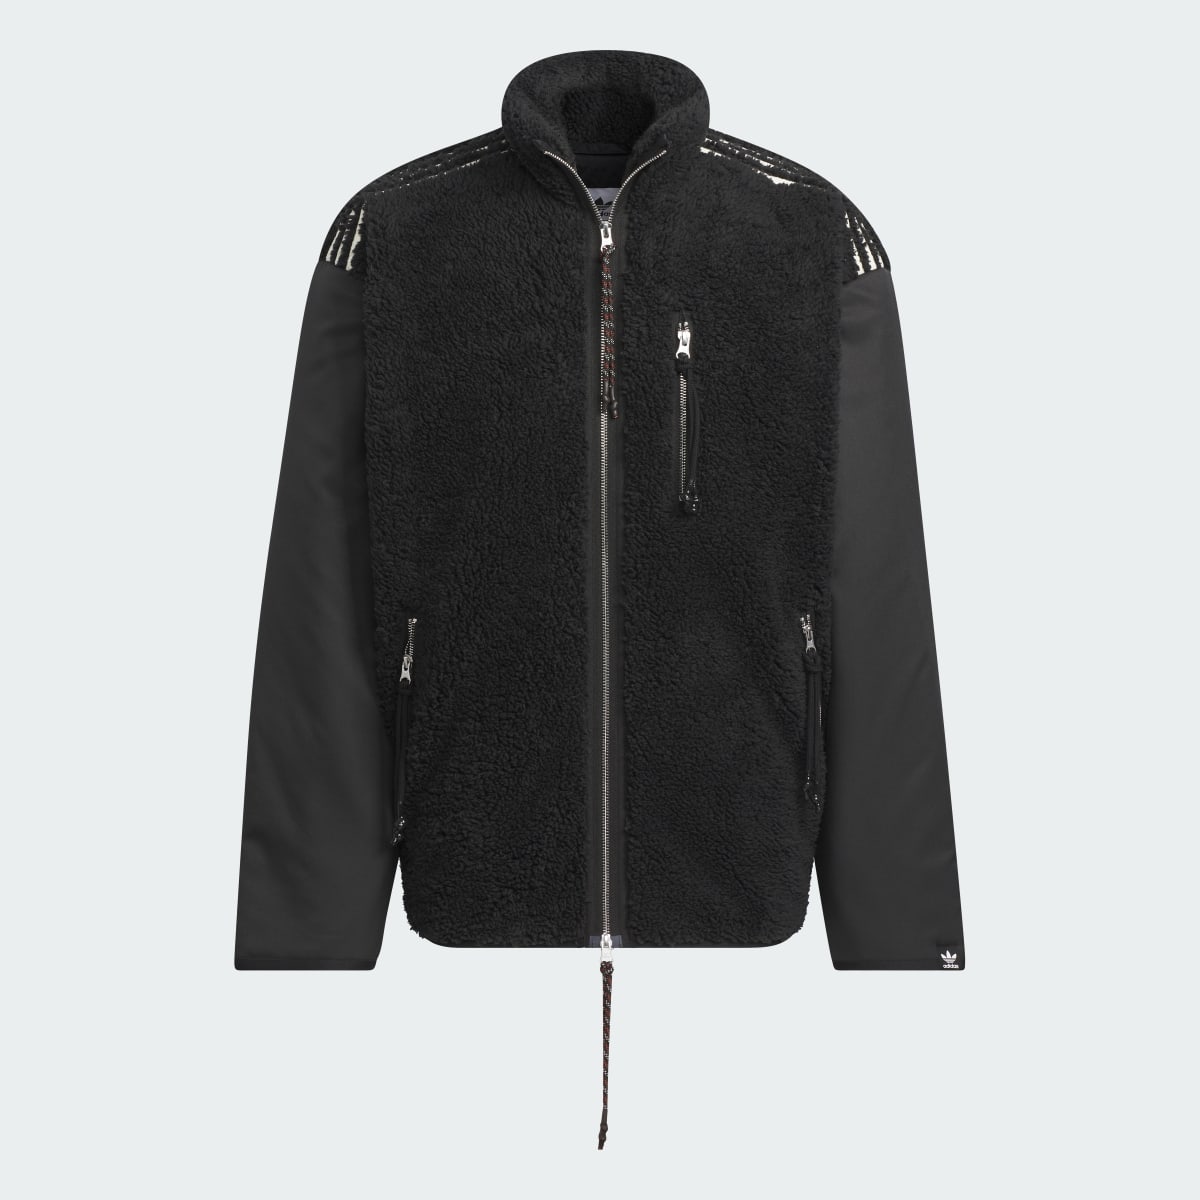 Adidas Song for the Mute Fleece Jacket (Gender Neutral). 4